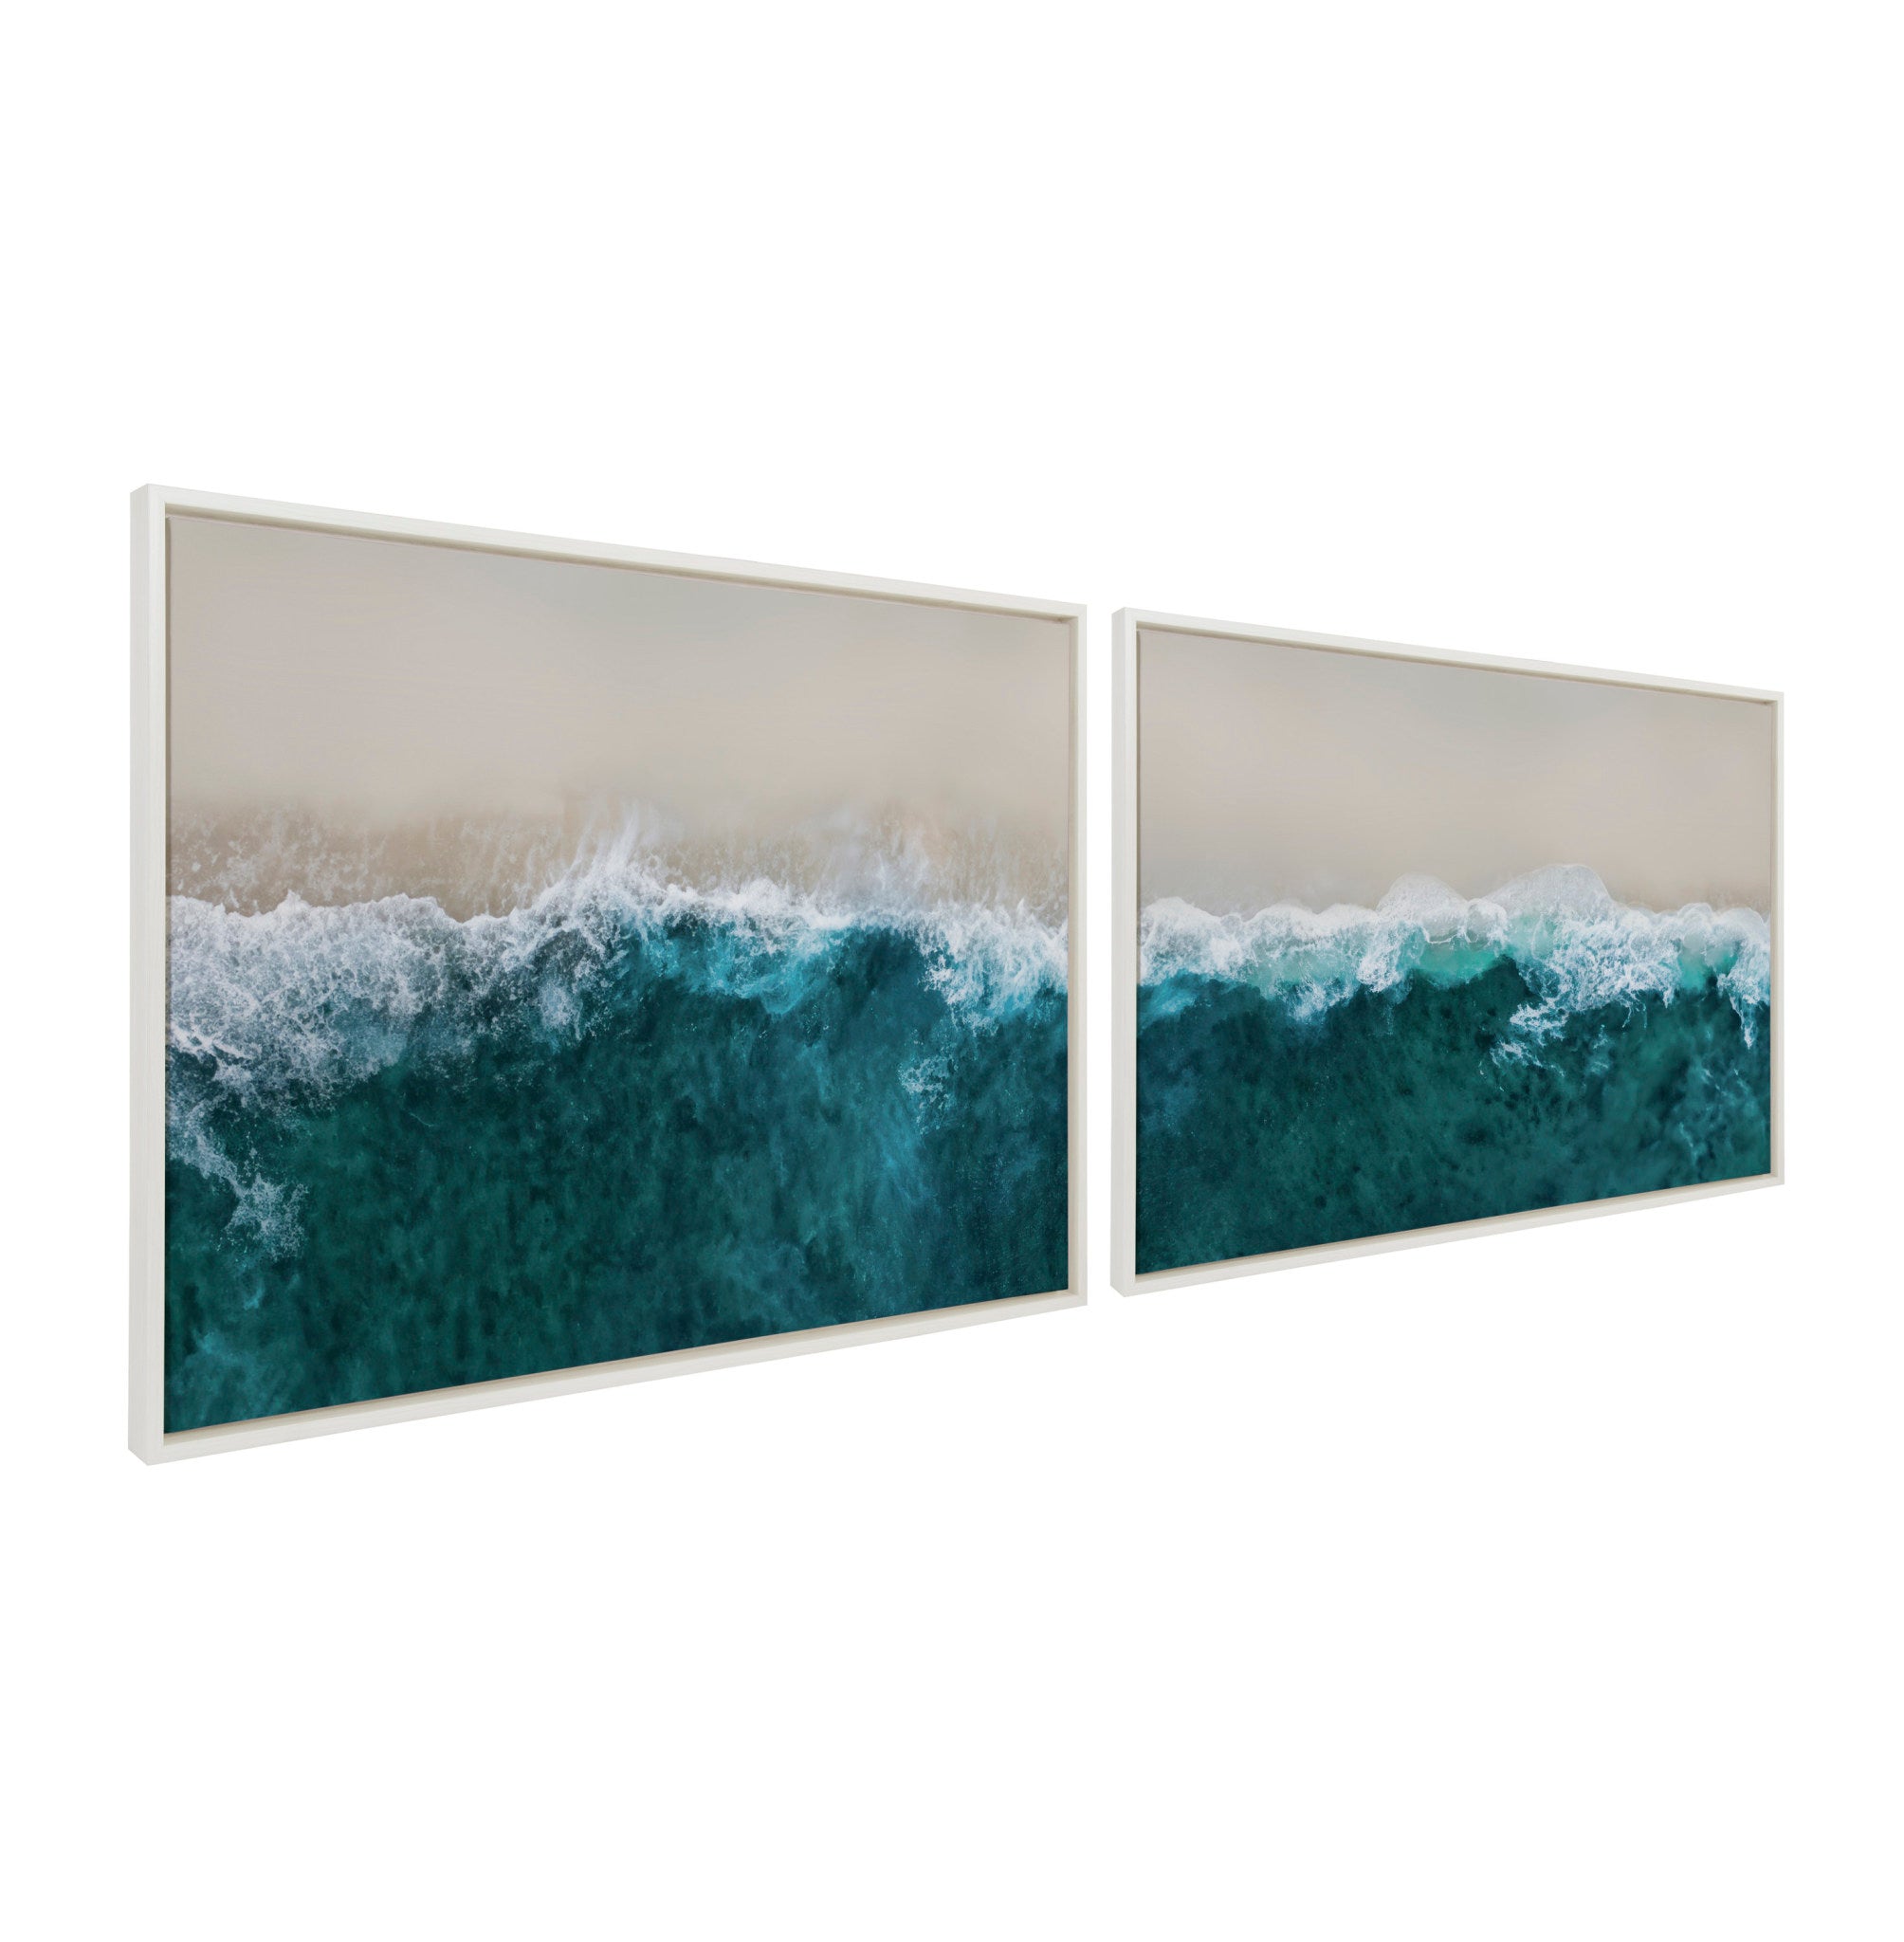 Sylvie Waves Crashing on the Beach 1 and 2 Framed Canvas Art Set by The Creative Bunch Studio